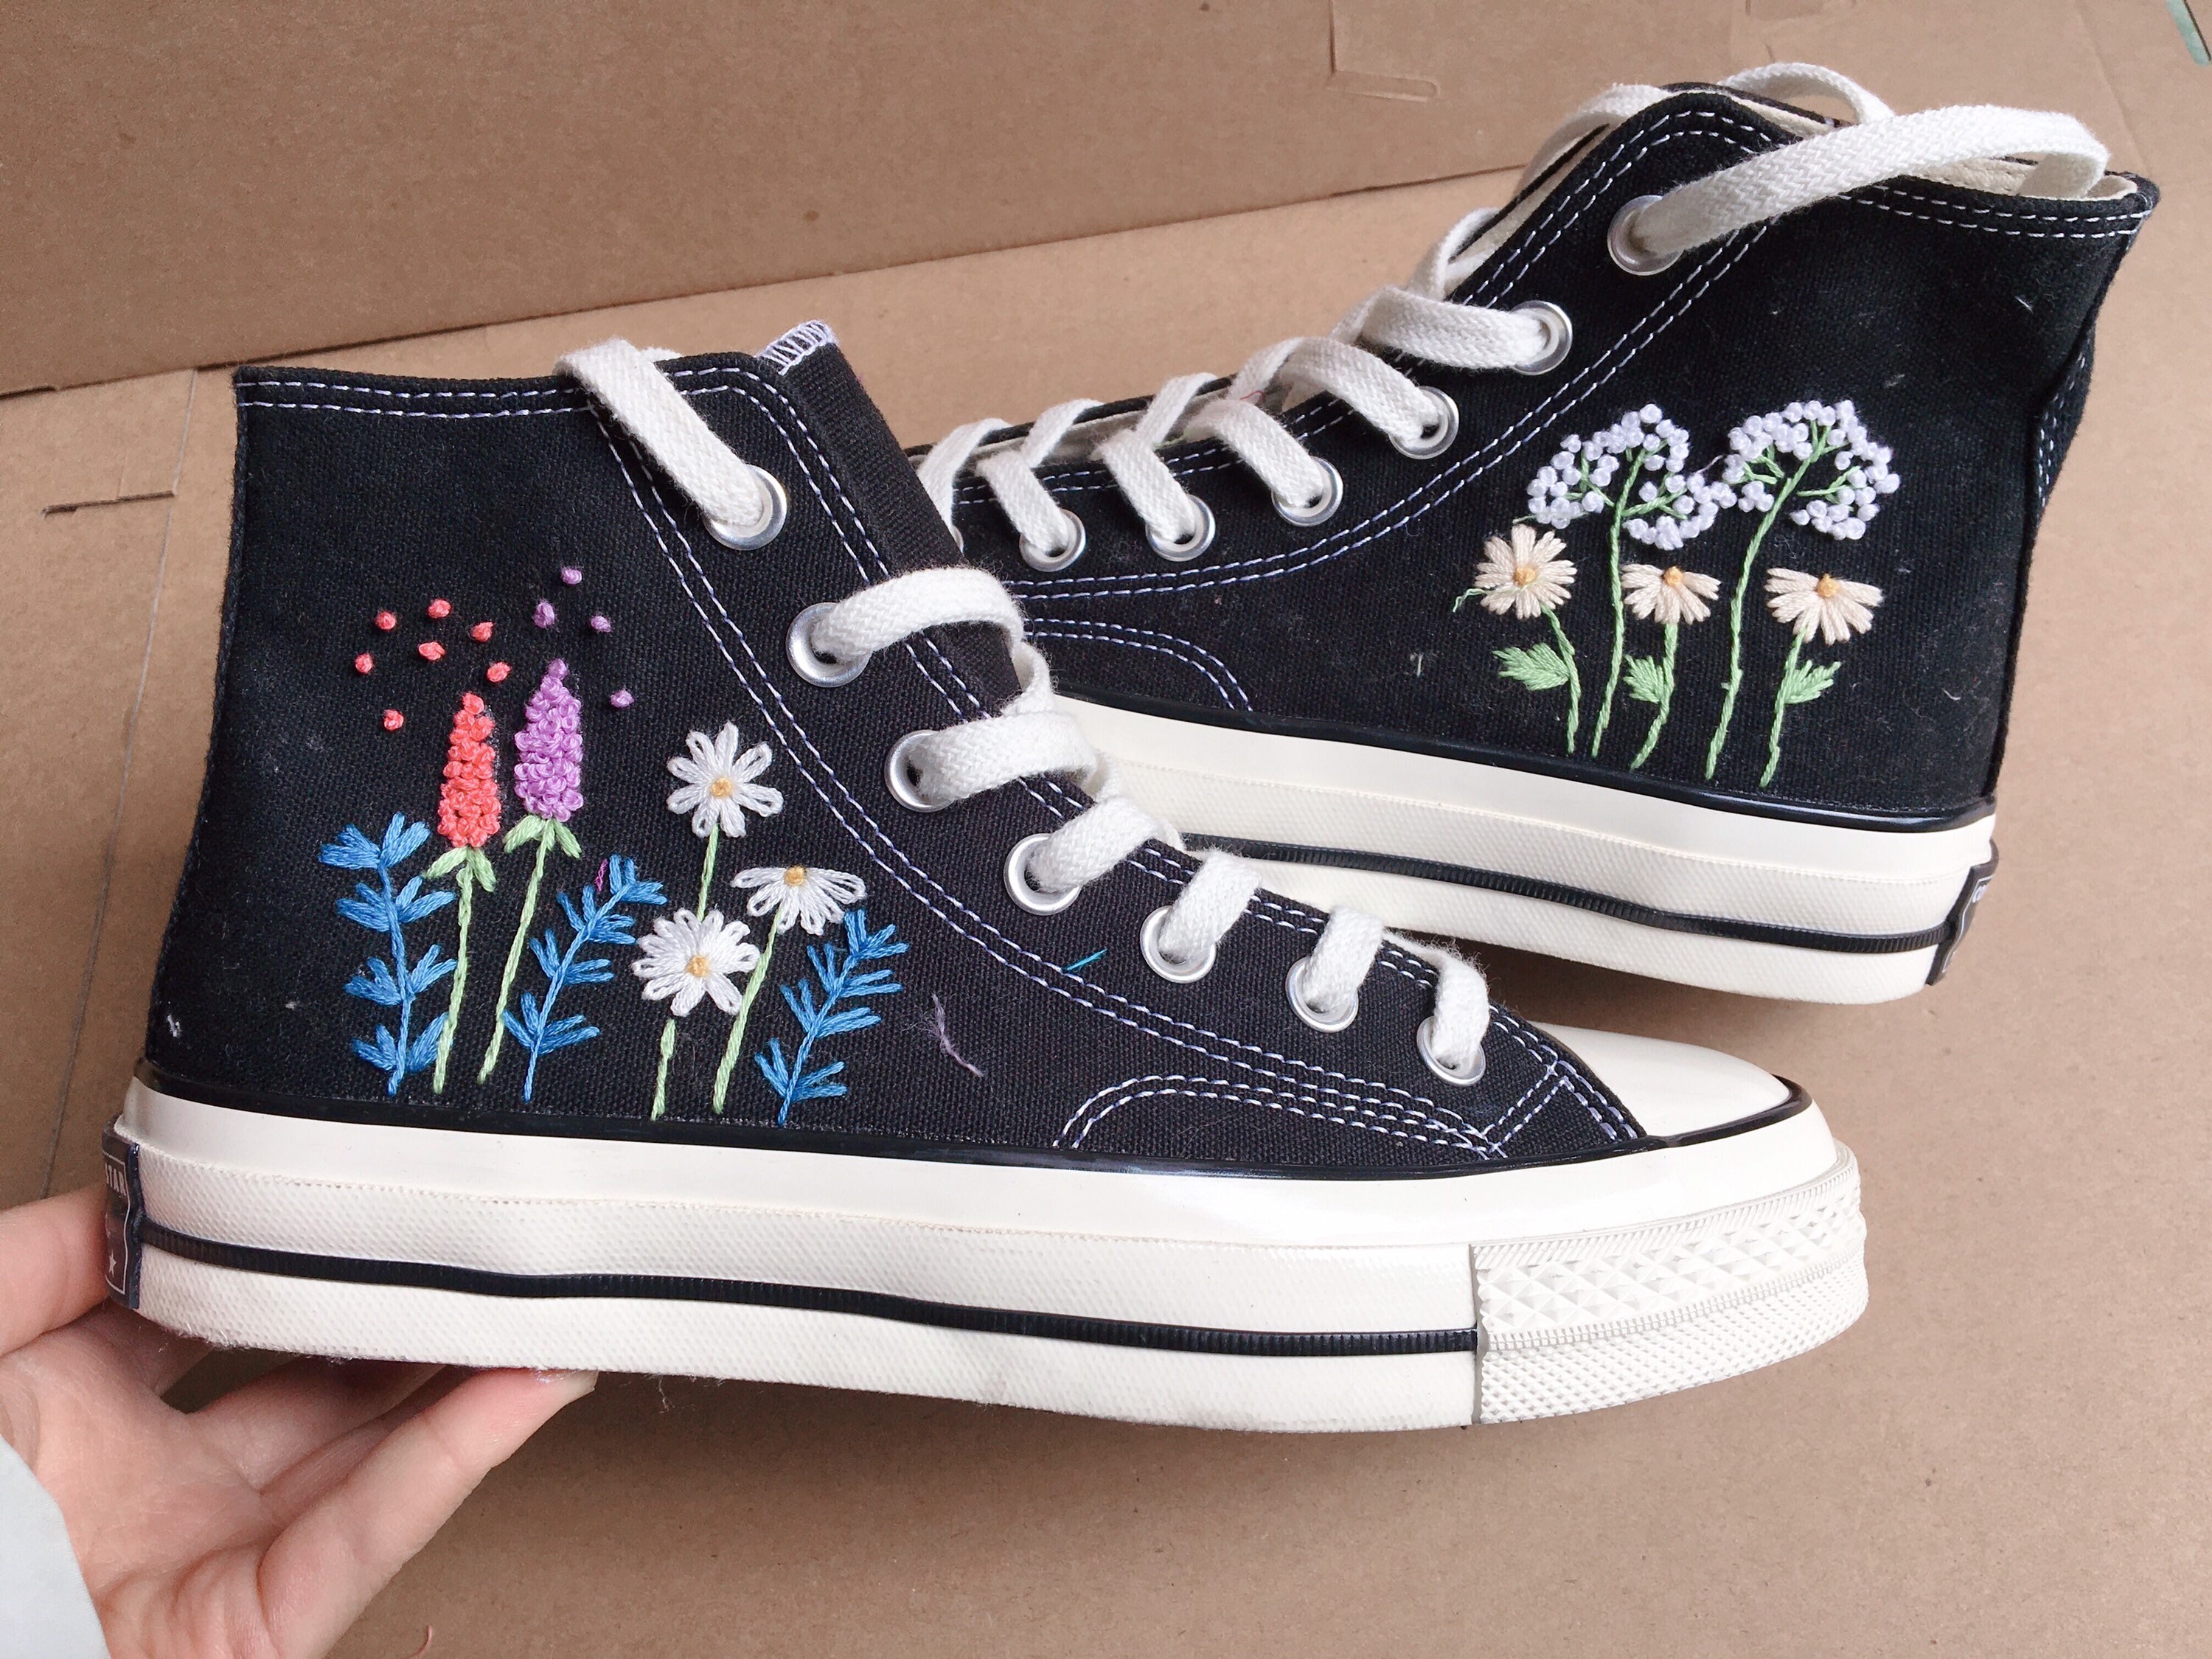 Convese Platform Custom Floral Embroidery / Converse - Etsy